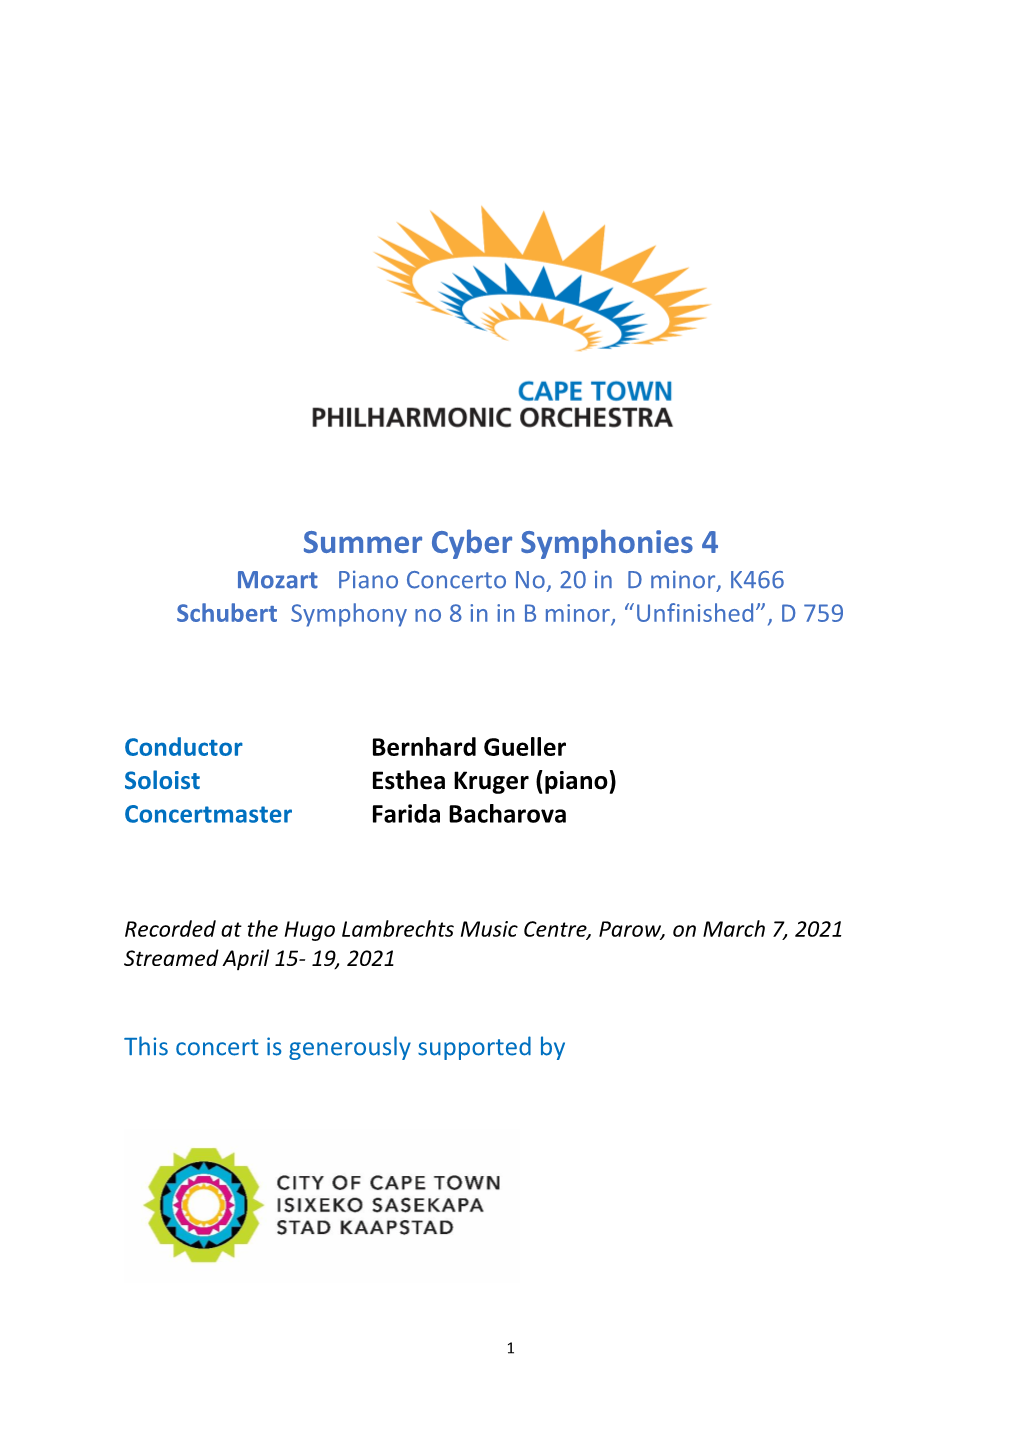 Summer Cyber Symphonies 4 Mozart Piano Concerto No, 20 in D Minor, K466 Schubert Symphony No 8 in in B Minor, “Unfinished”, D 759